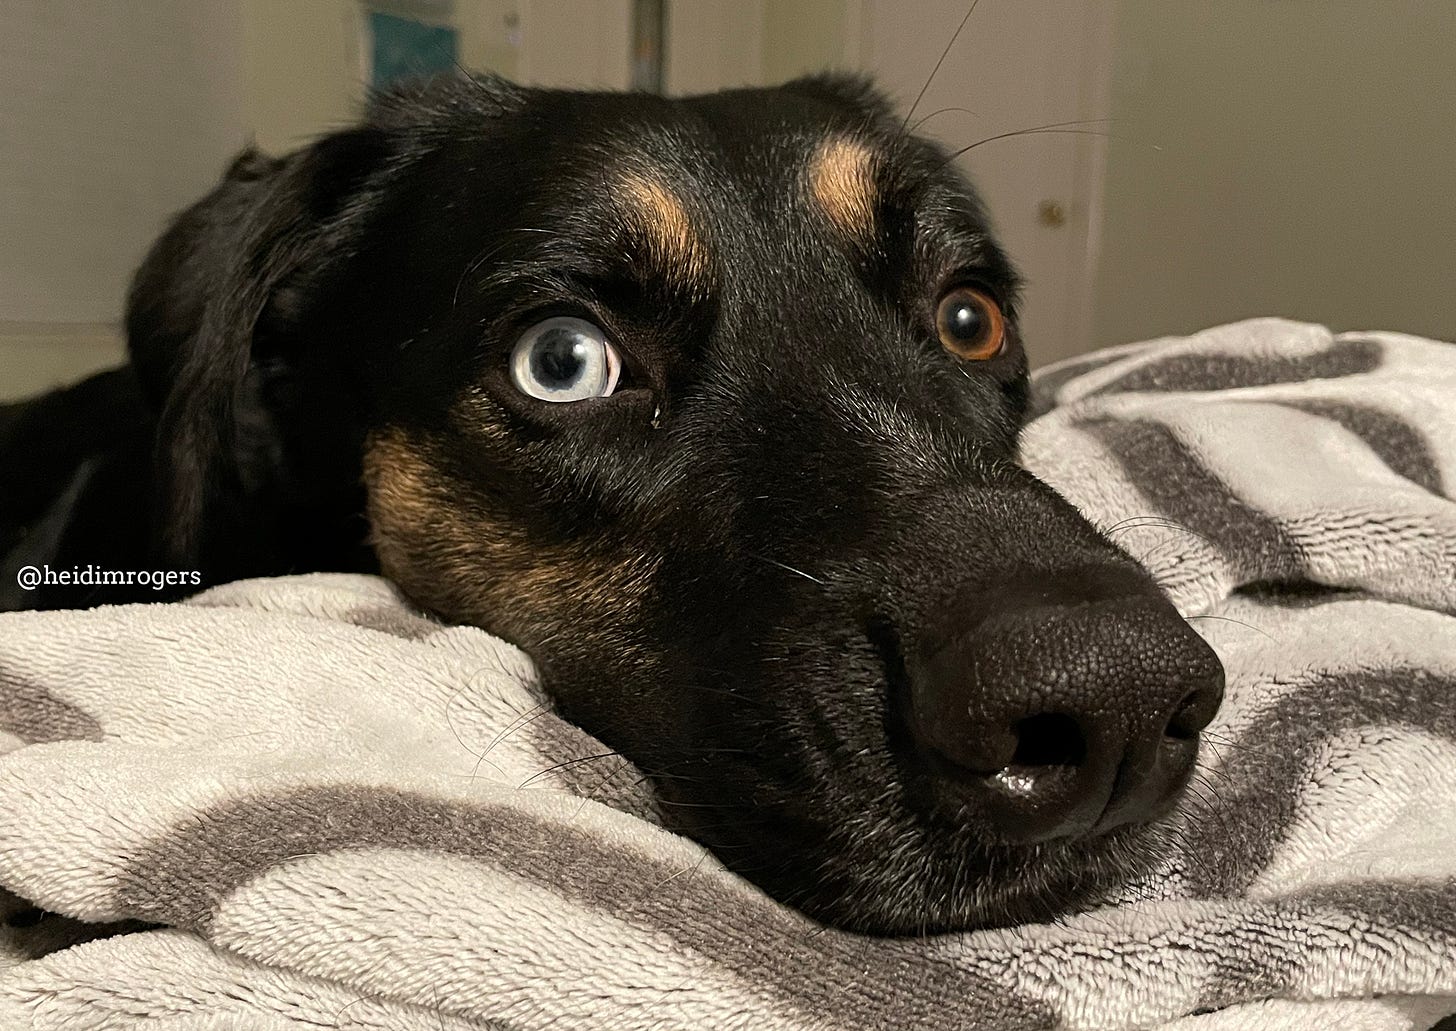 Black dog with bits of brown fur, one icy blue eye and one brown eye, resting her head on a gray blanket